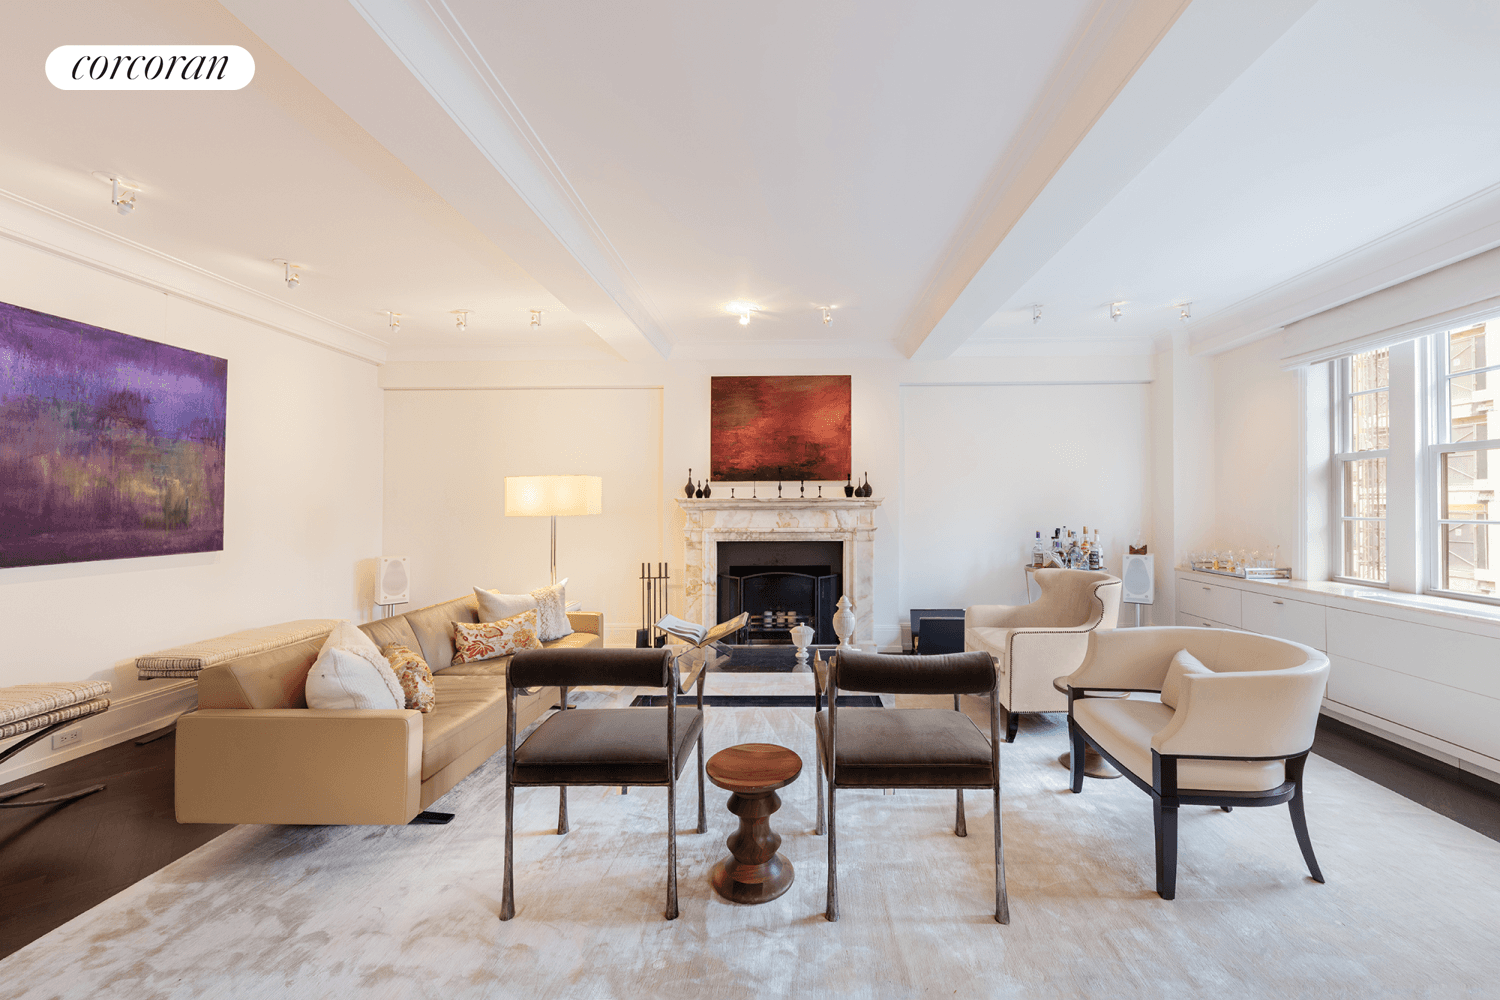 Introducing 40 East 66th St, 7B, a remarkable pre war residence located in one of the Upper East side's premier white glove Condominiums, designed by Rosario Candela in 1929.